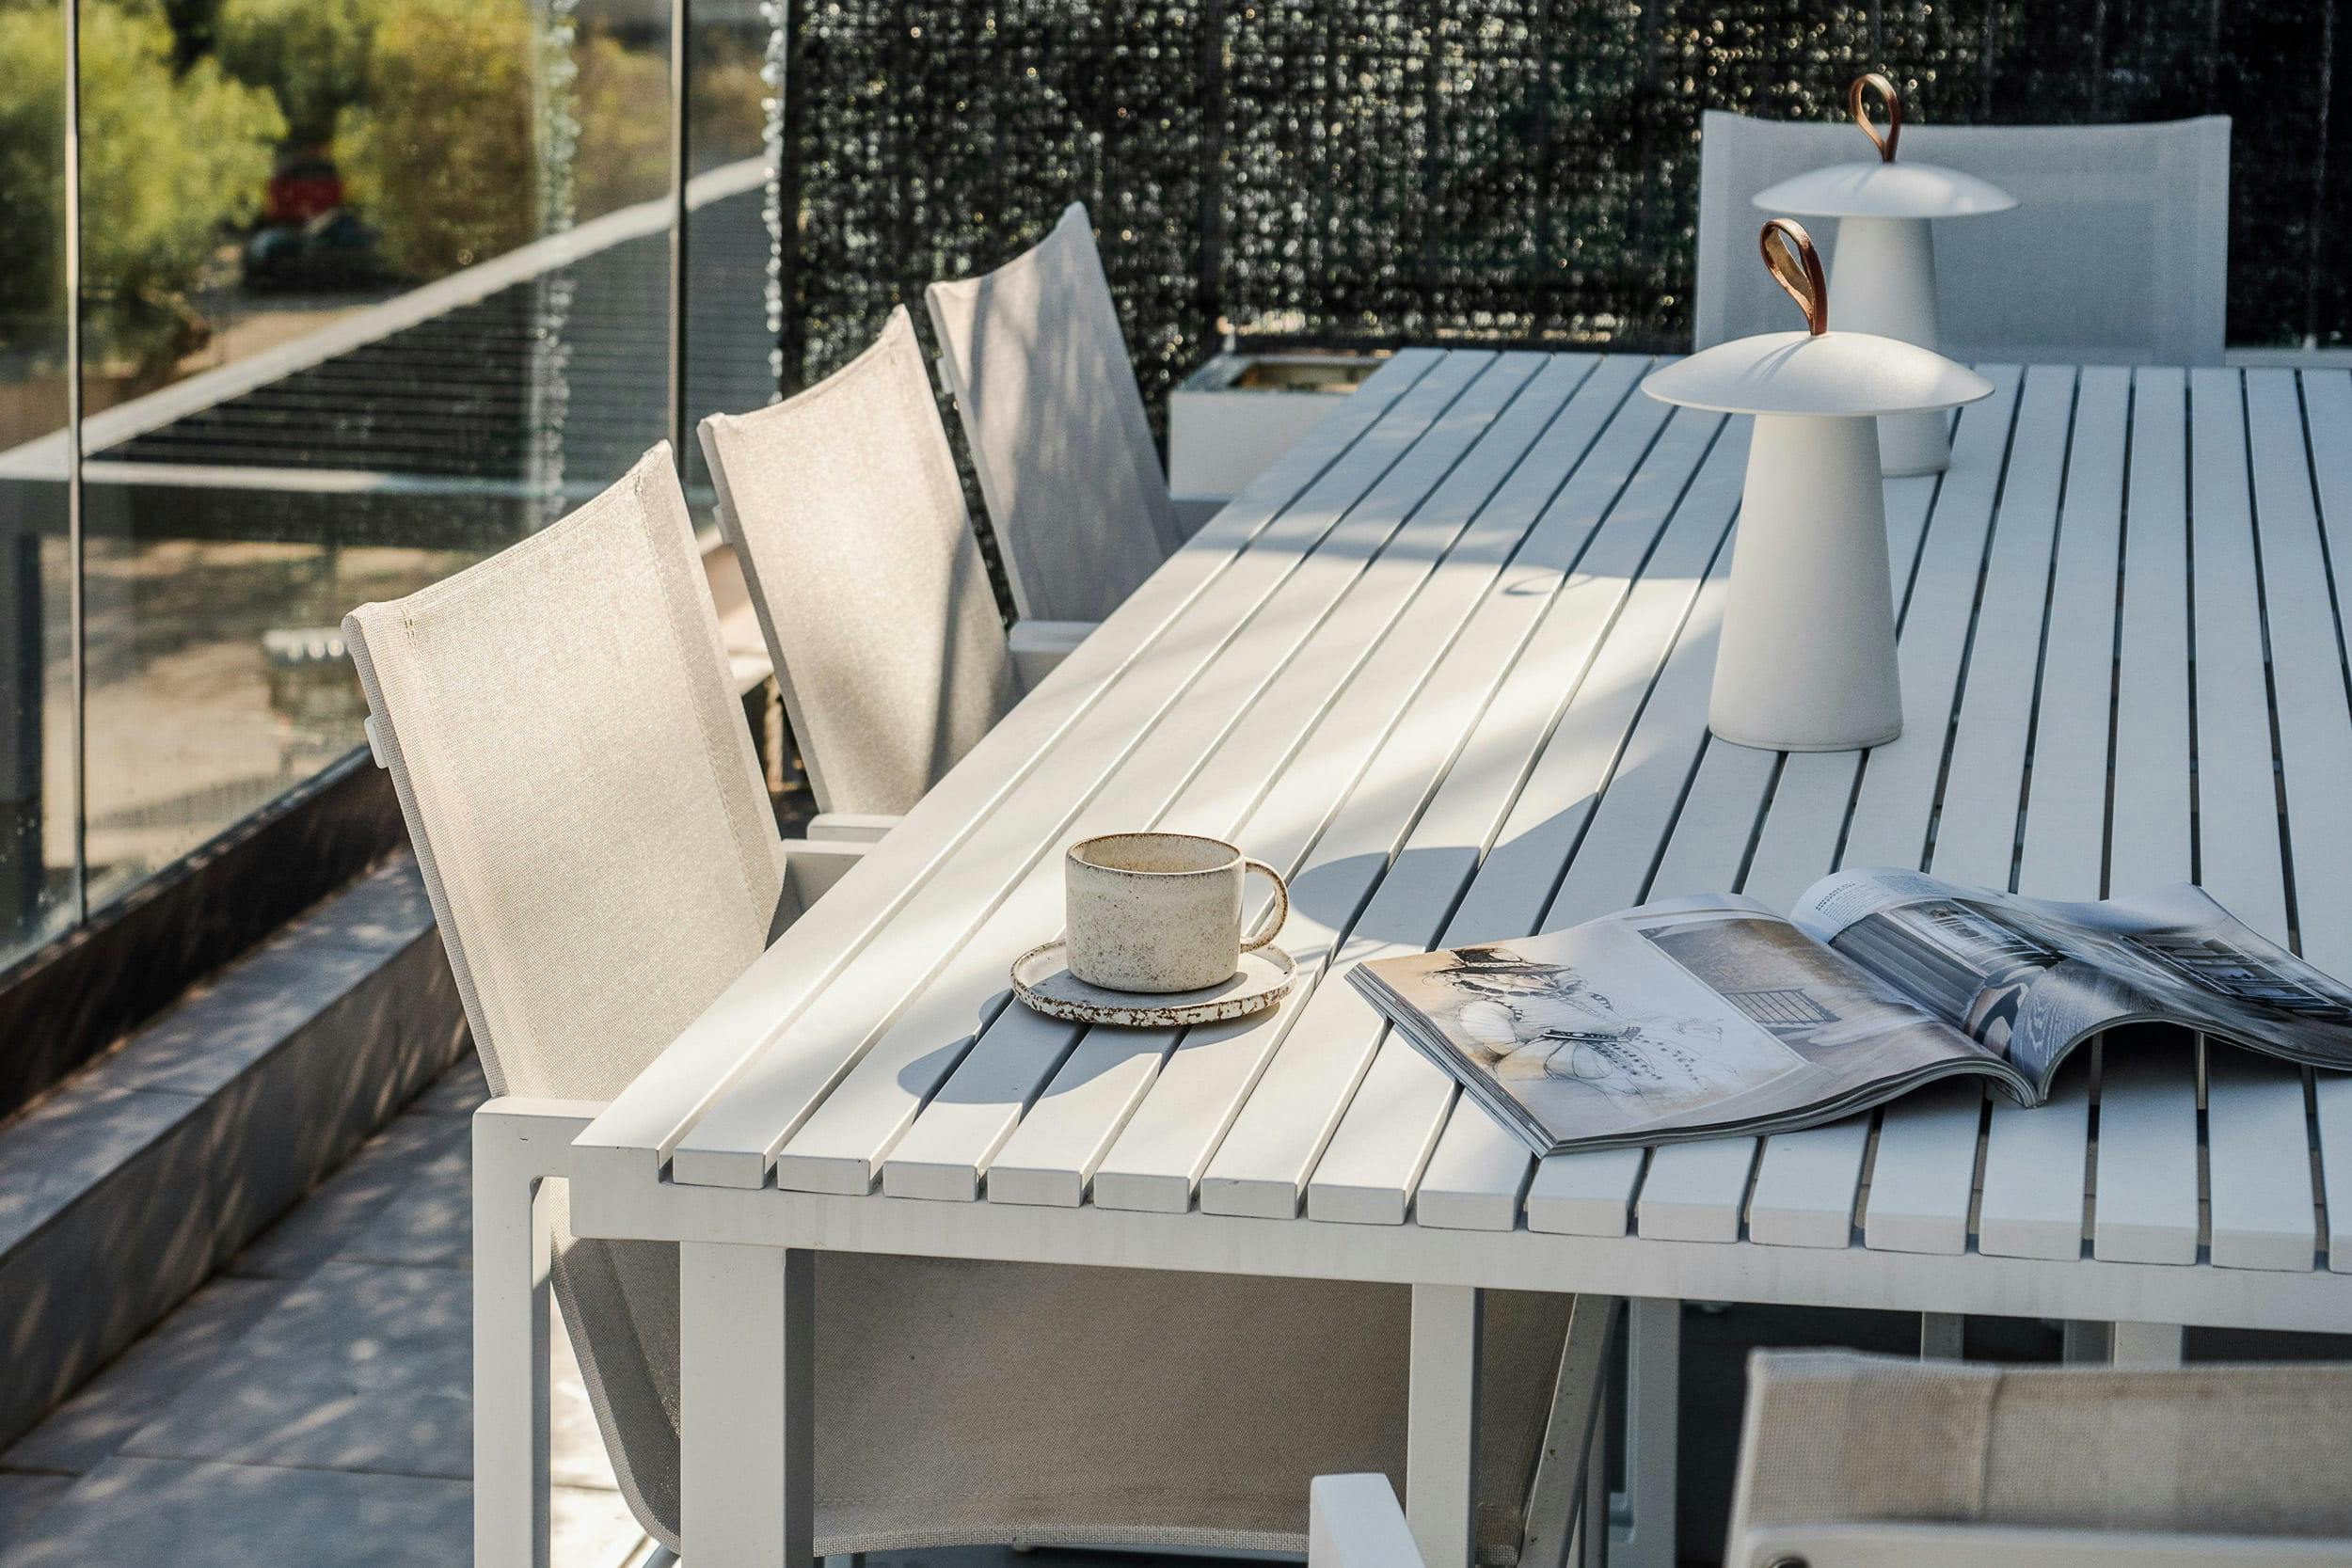 A white table with a cup of coffee, a book, and a napkin is set up on a patio, with a chair nearby.